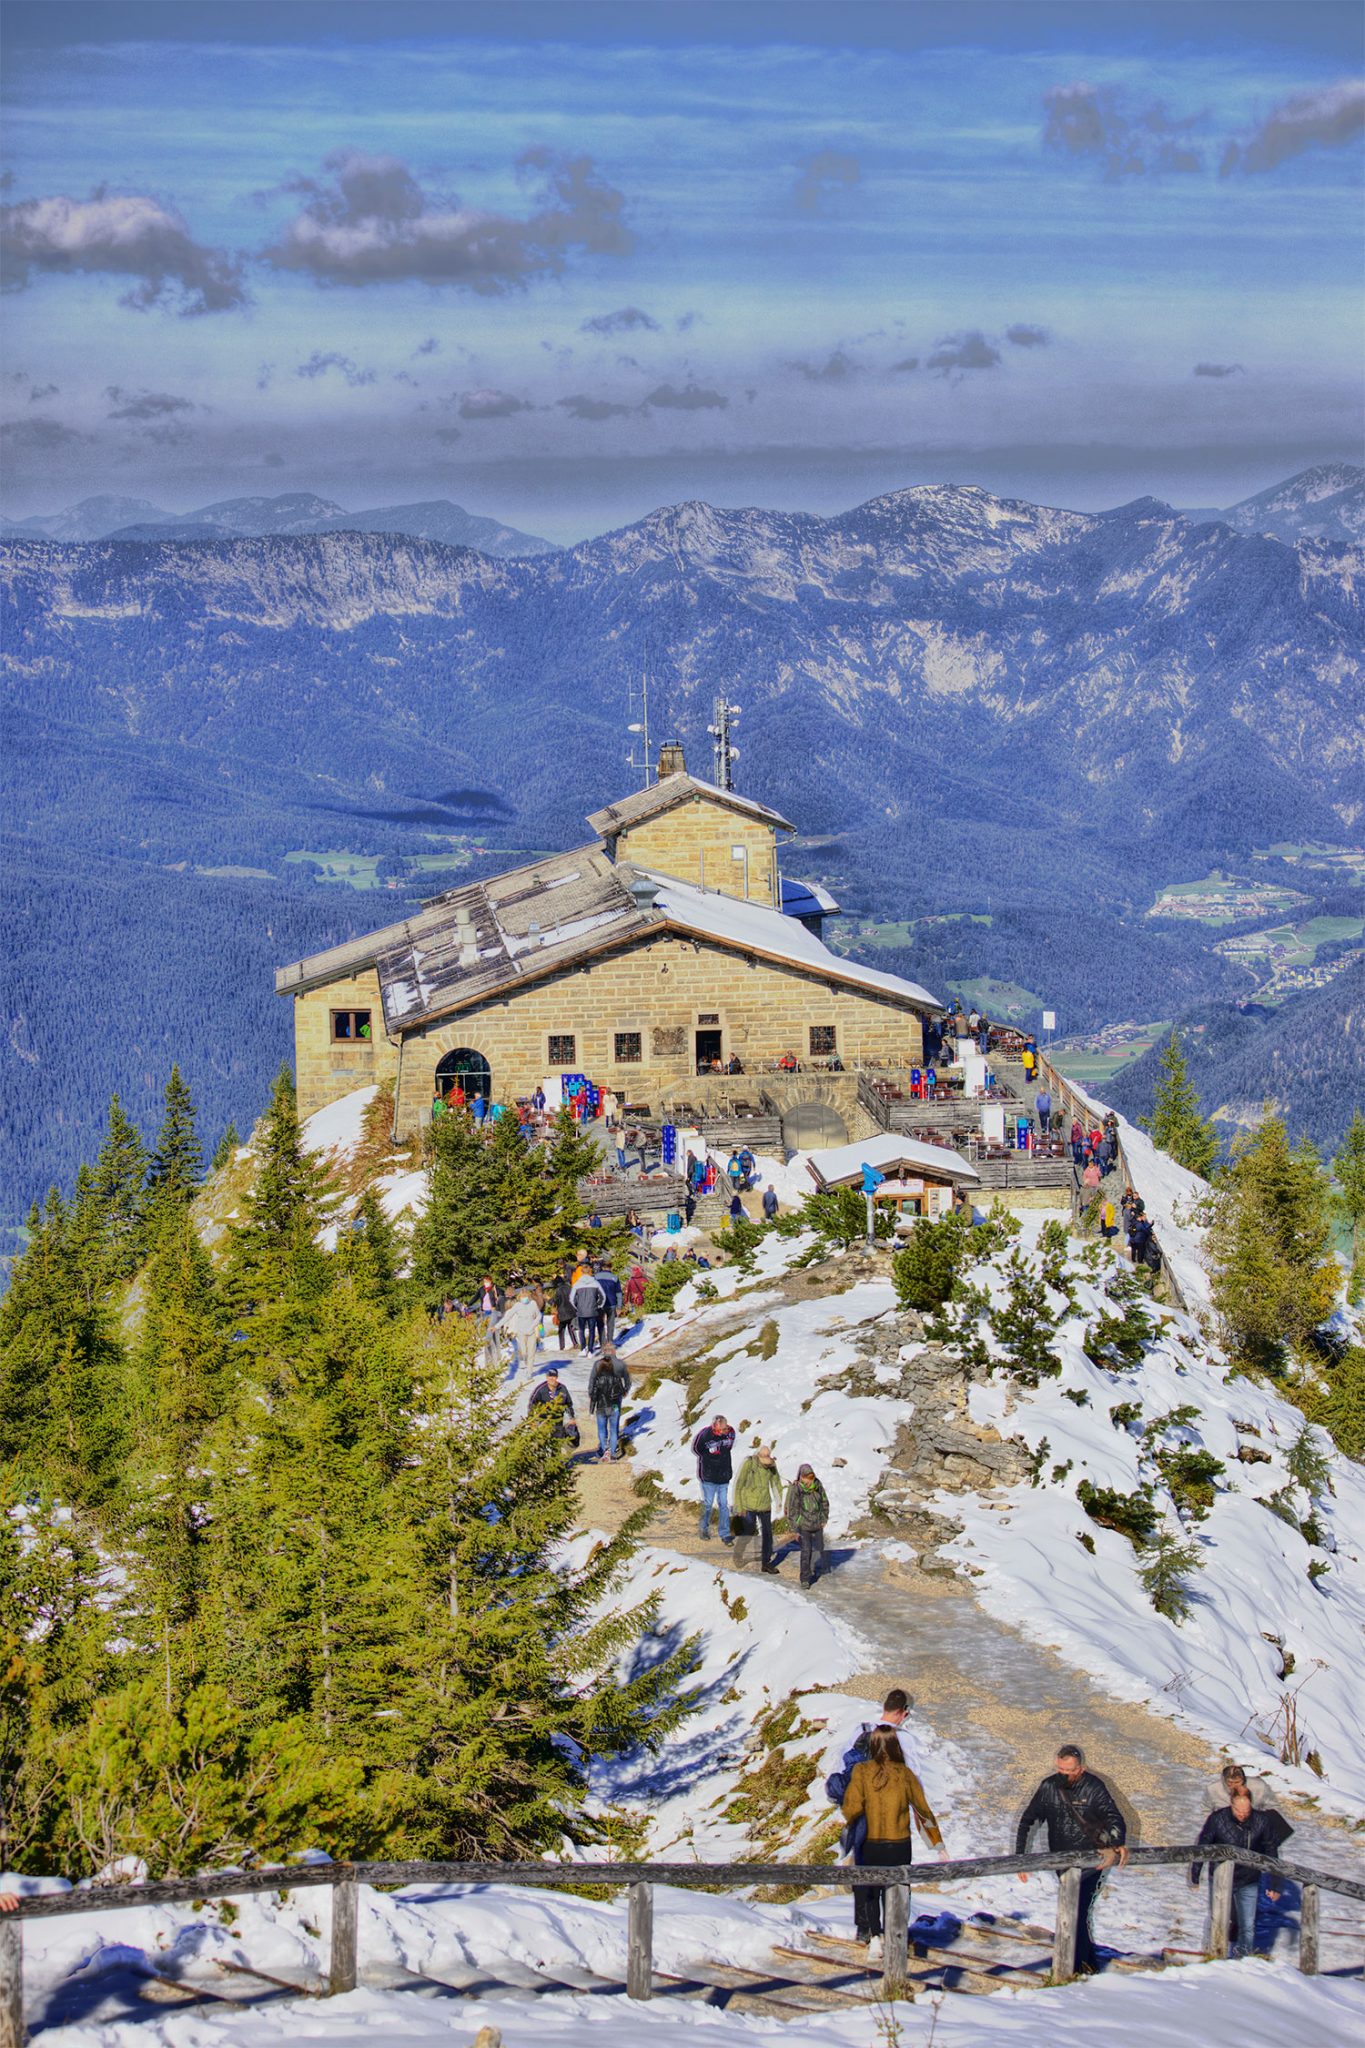 The Eagles Nest, Germany